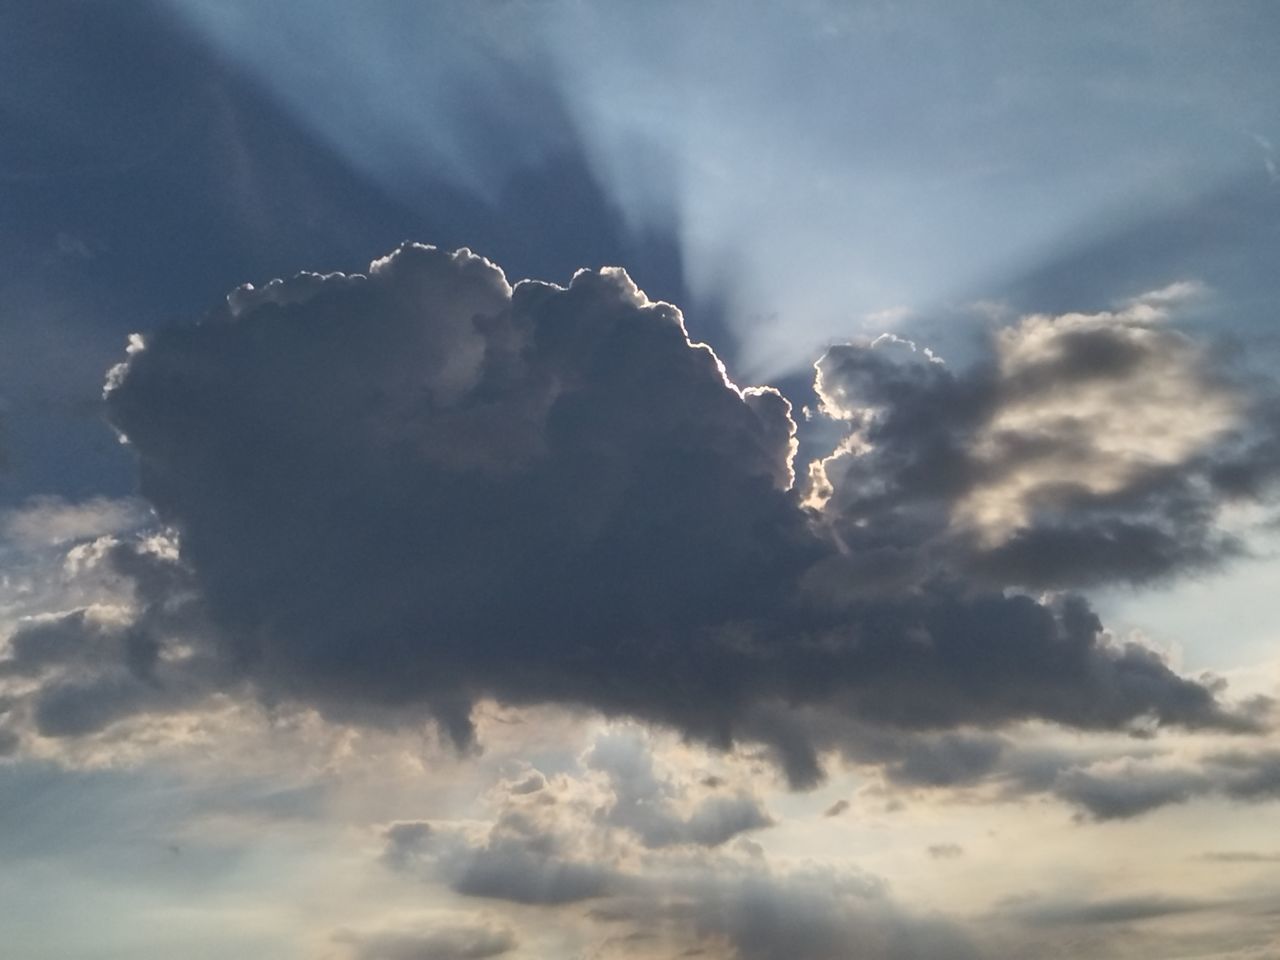 sky, cloud, beauty in nature, nature, storm, environment, thunderstorm, dramatic sky, cloudscape, no people, storm cloud, thunder, sunlight, outdoors, scenics - nature, low angle view, power in nature, day, sunbeam, awe